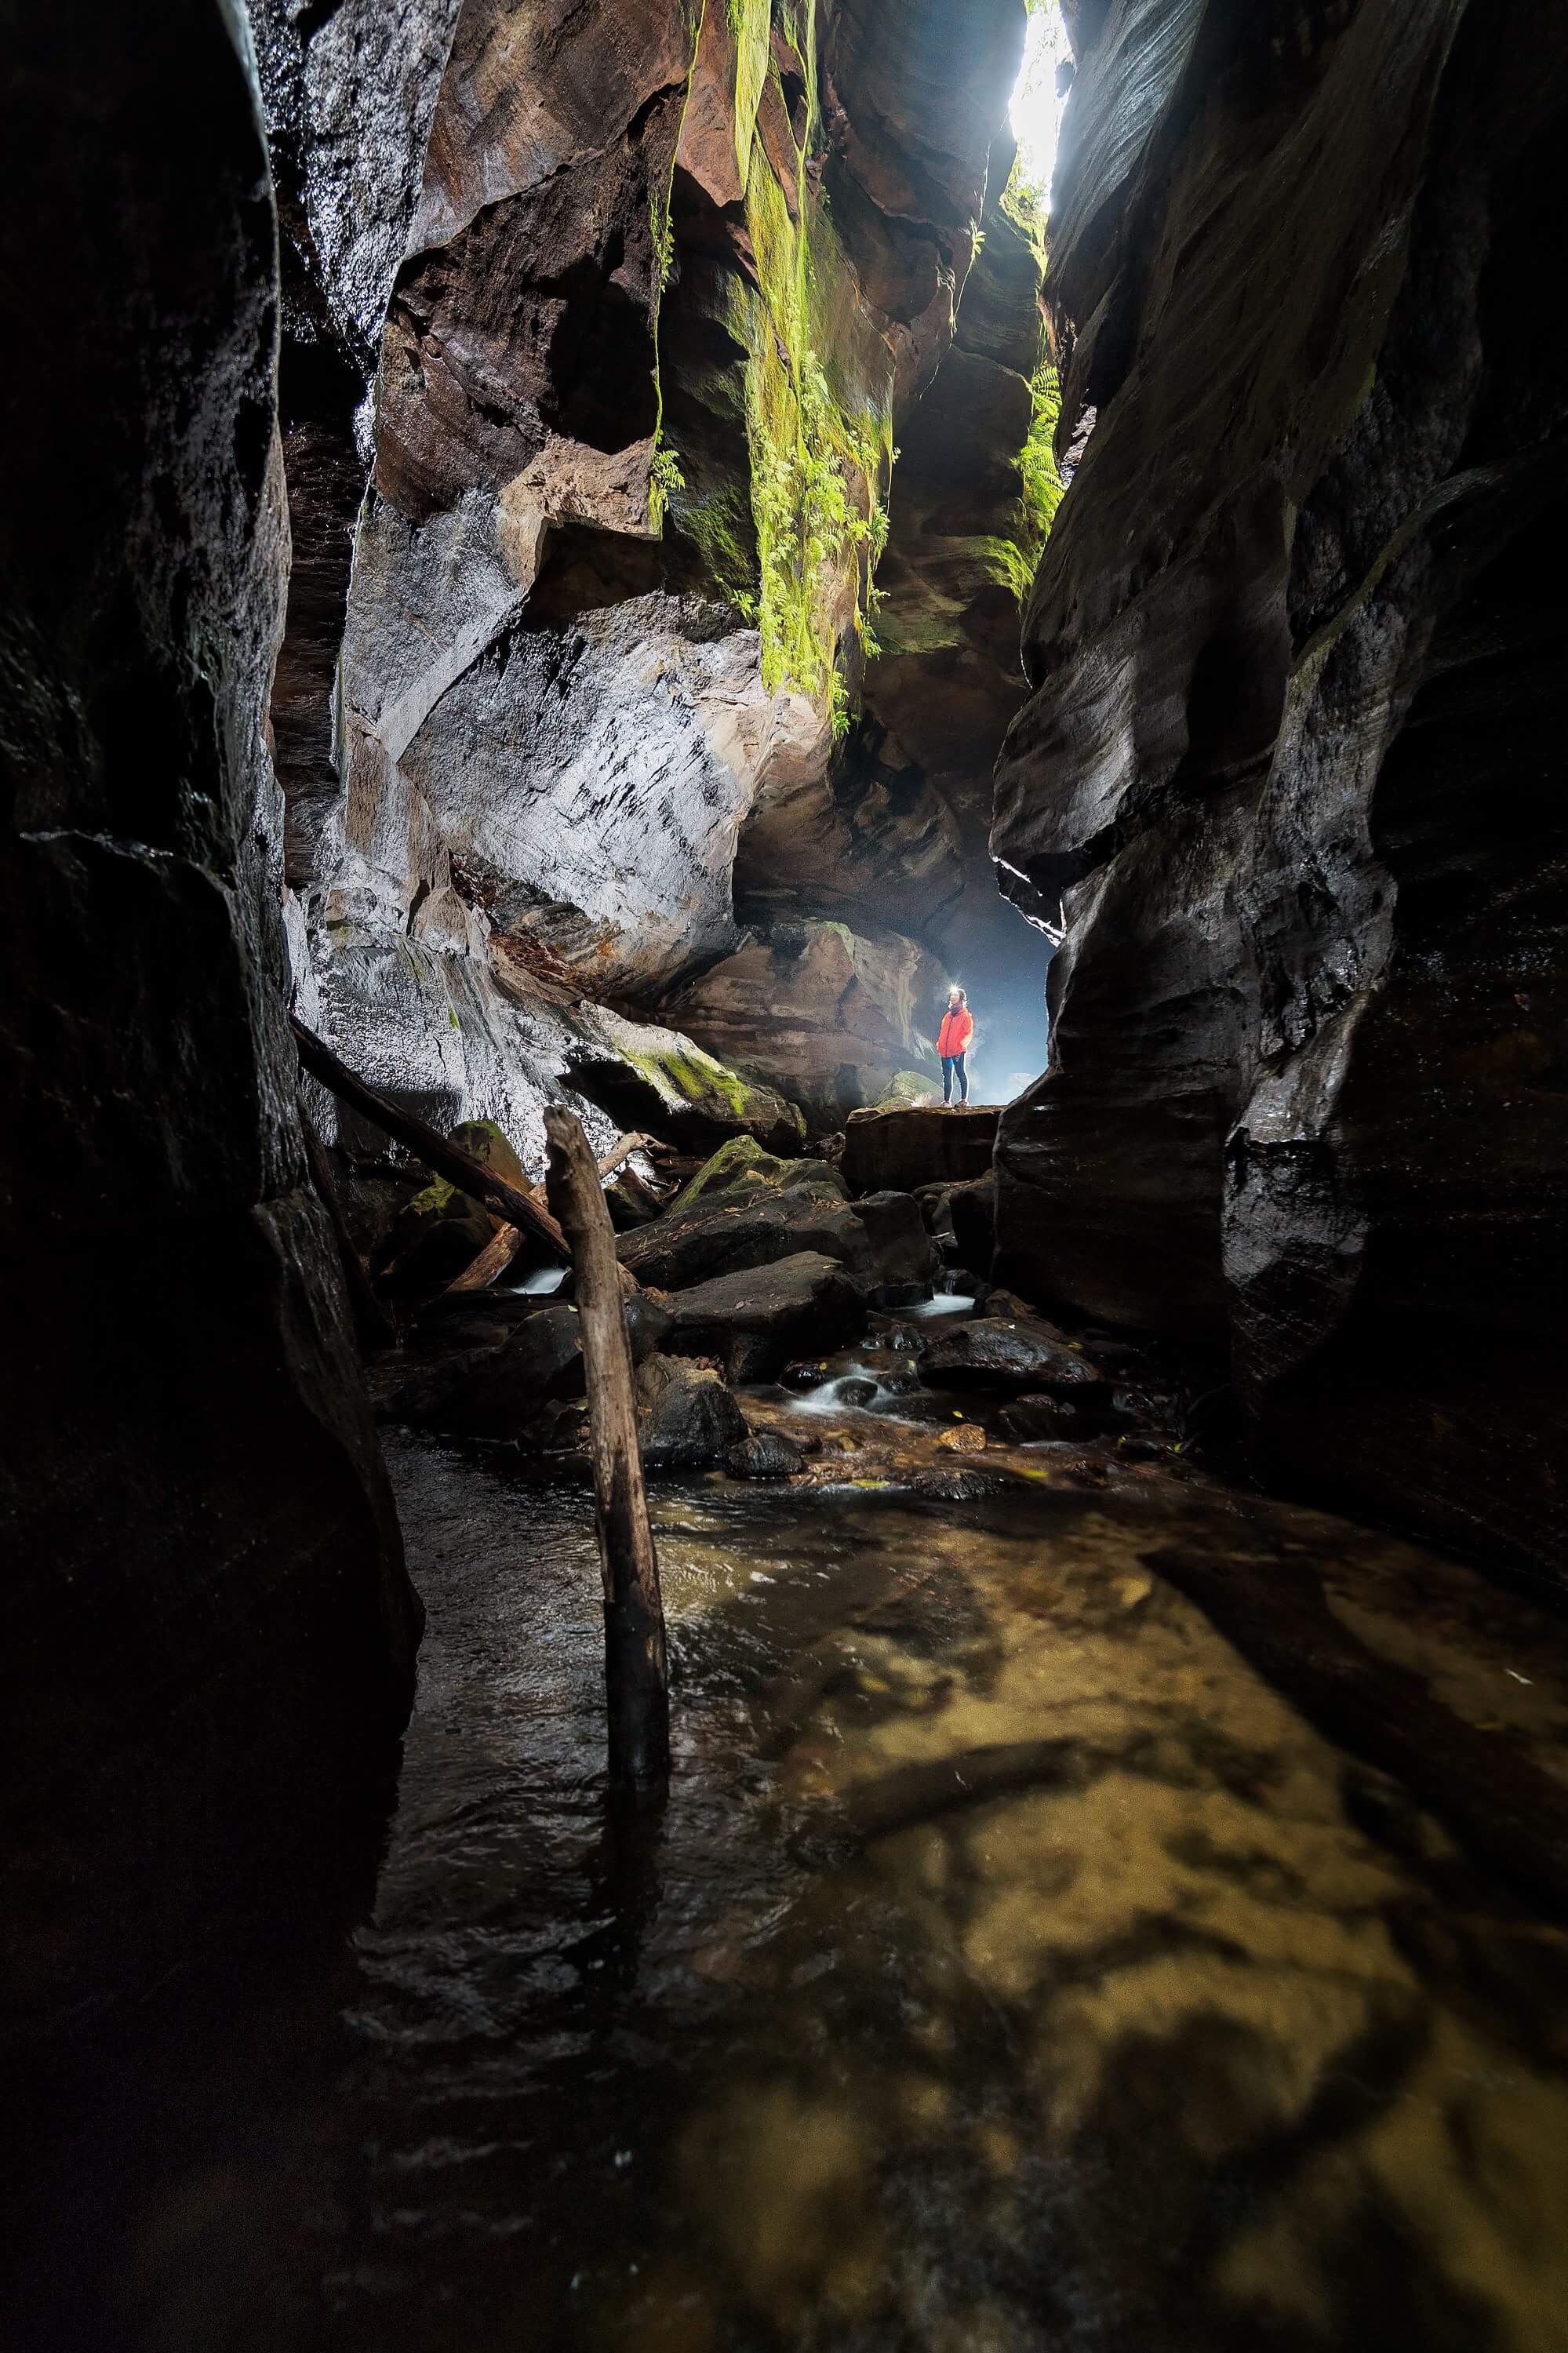 Exploring Rocky Creek canyon, Wollemi National Park. Photo: Jake Anderson